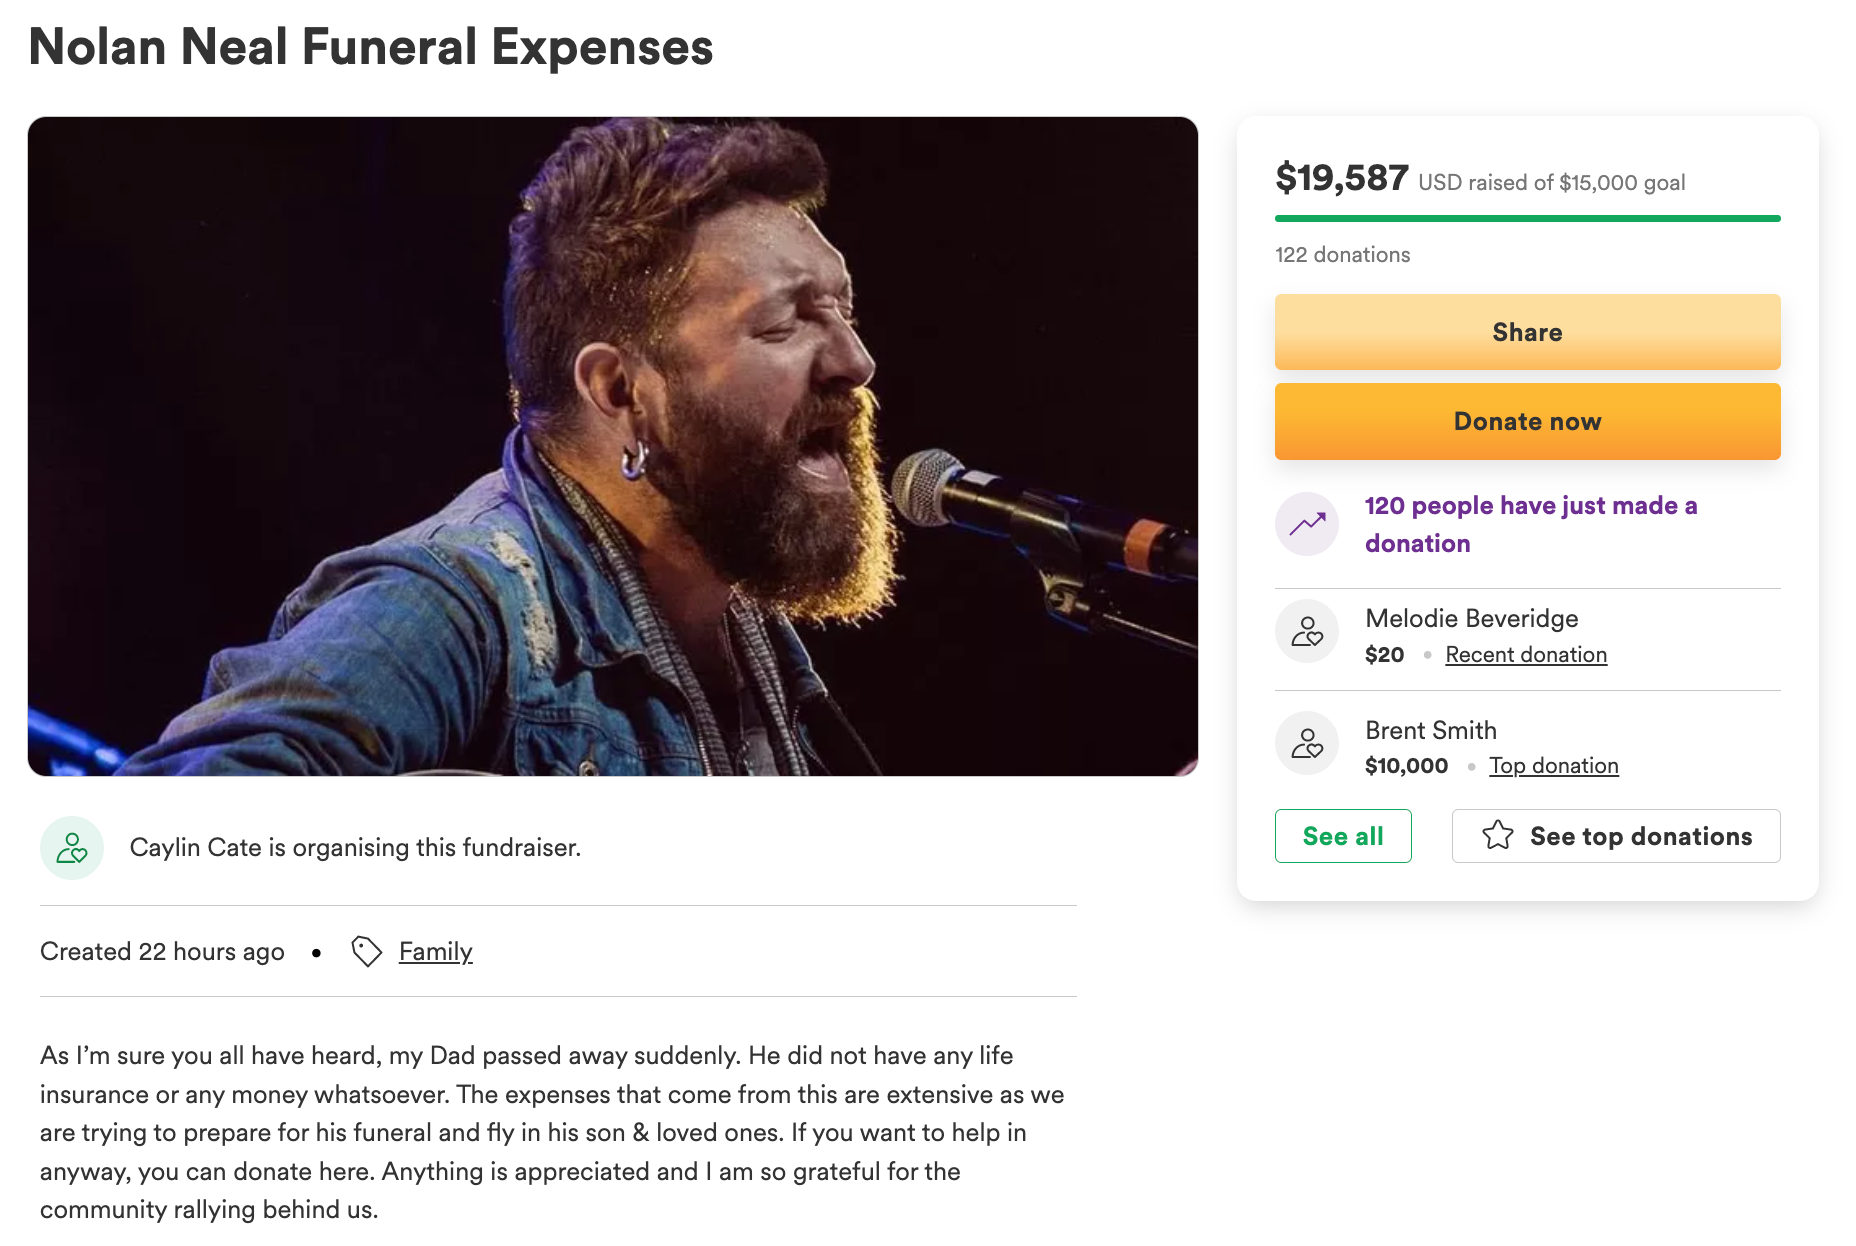 The fundraiser for Neal’s funeral costs